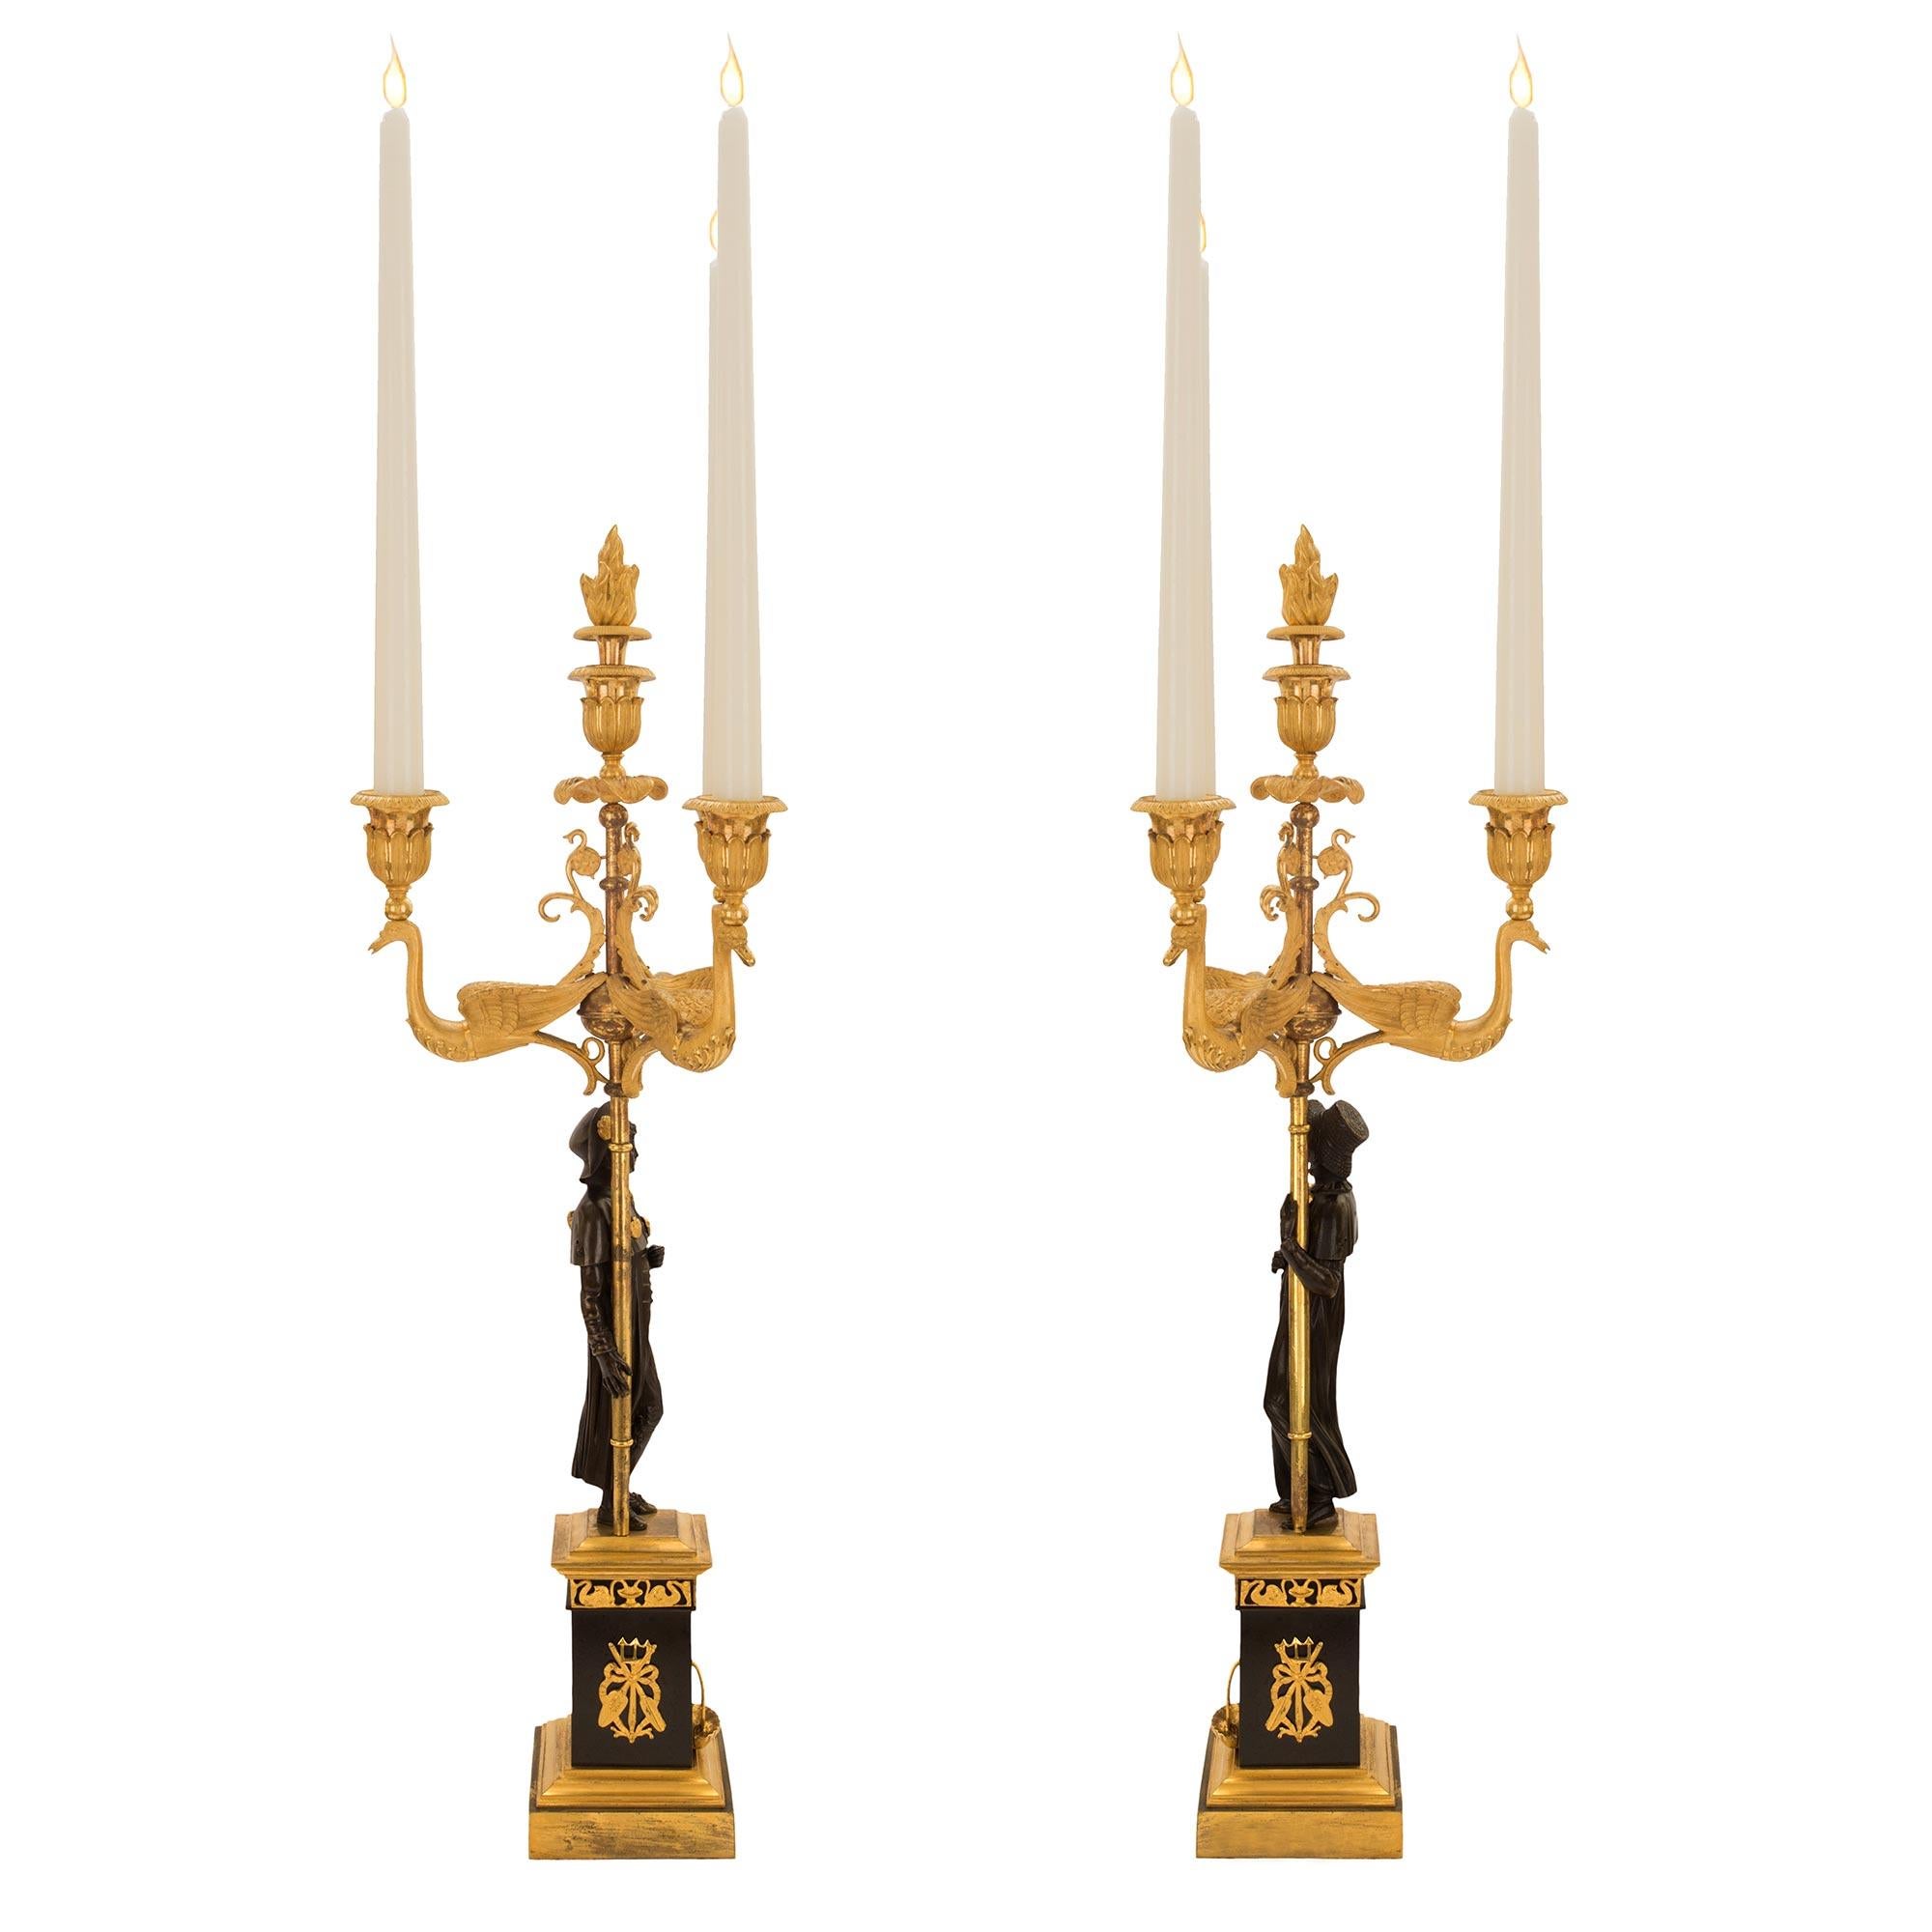 Patinated Pair of French 1st Empire Period Bronze and Ormolu Three-Light Candelabras For Sale